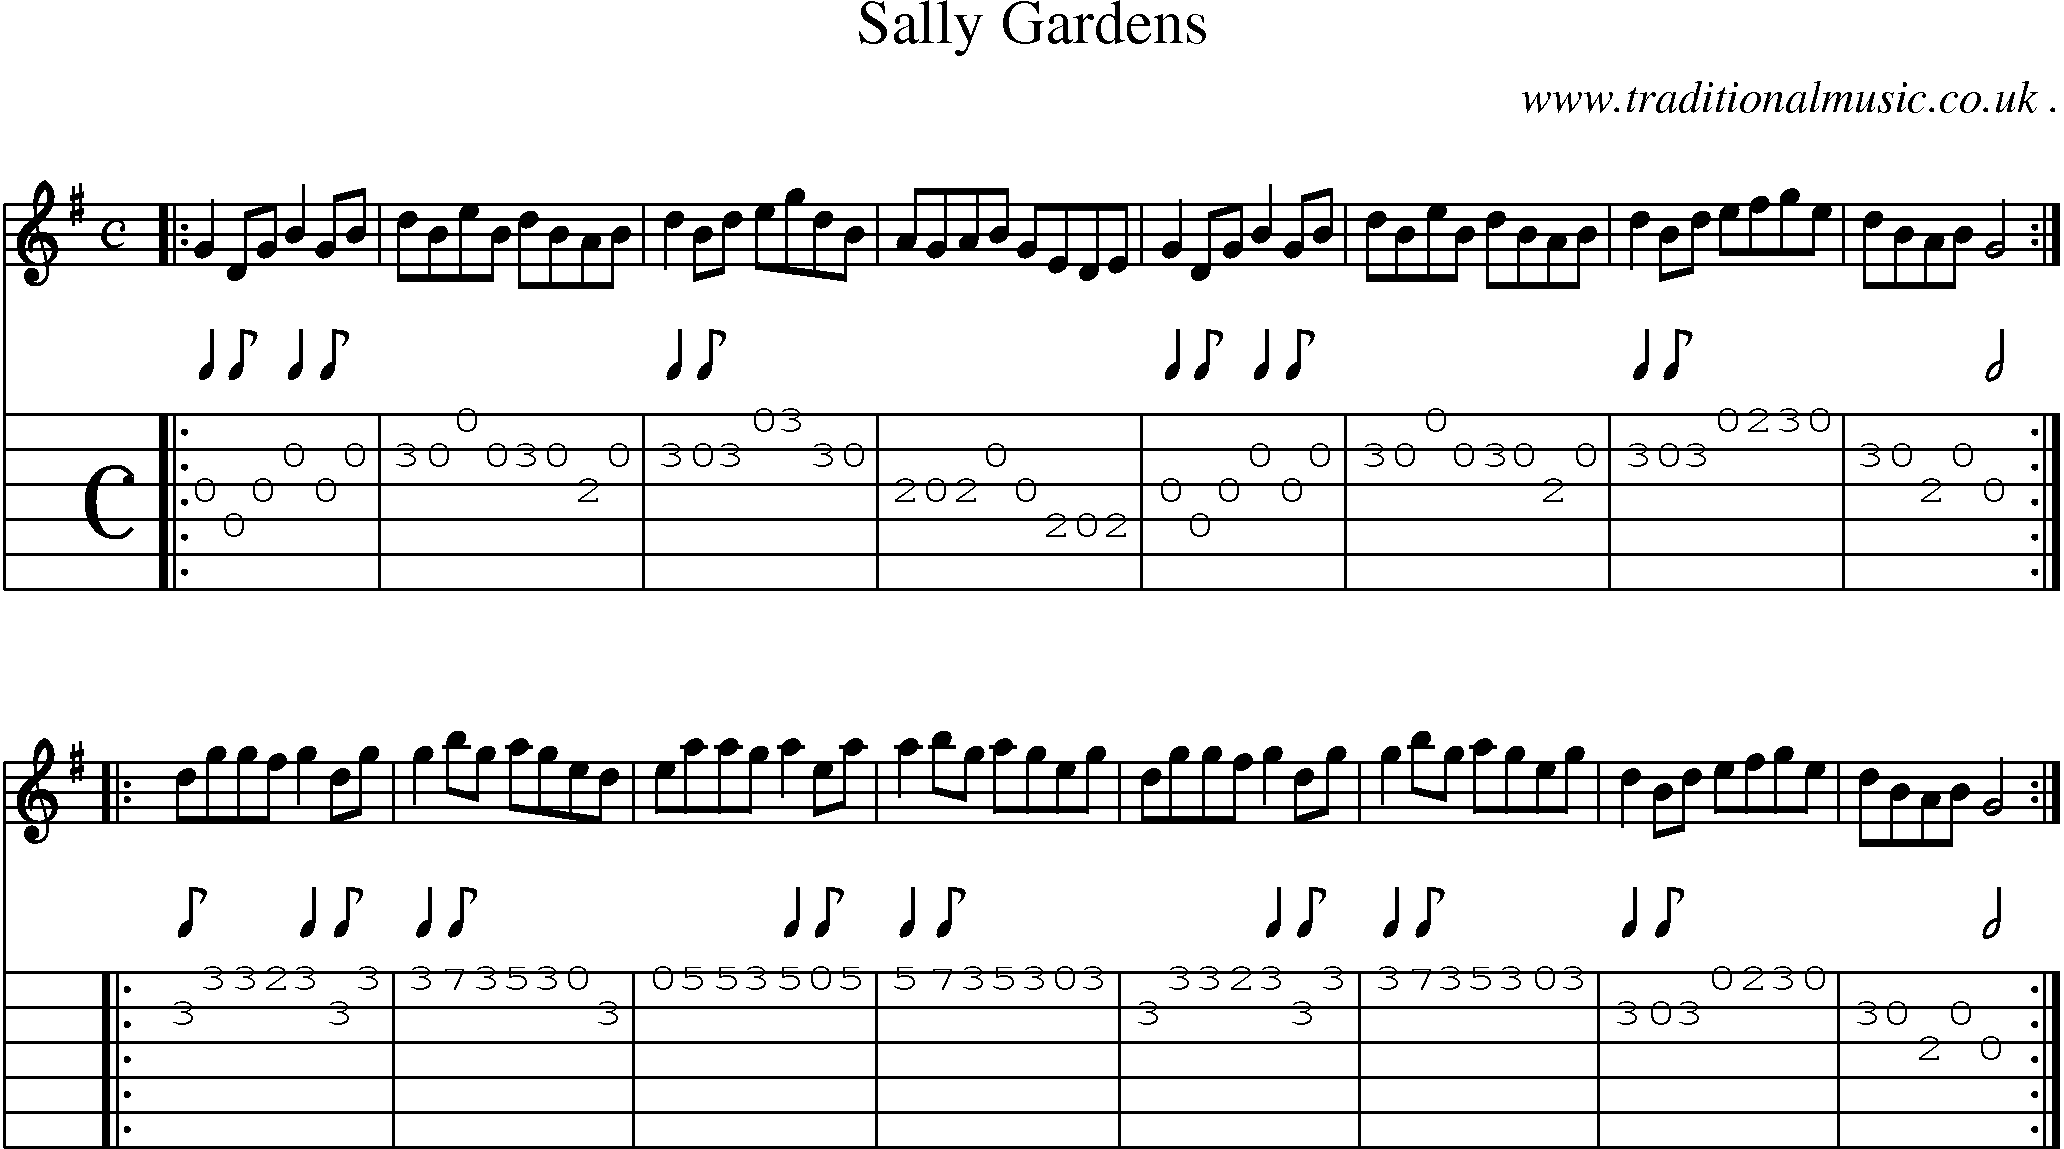 Sheet-music  score, Chords and Guitar Tabs for Sally Gardens